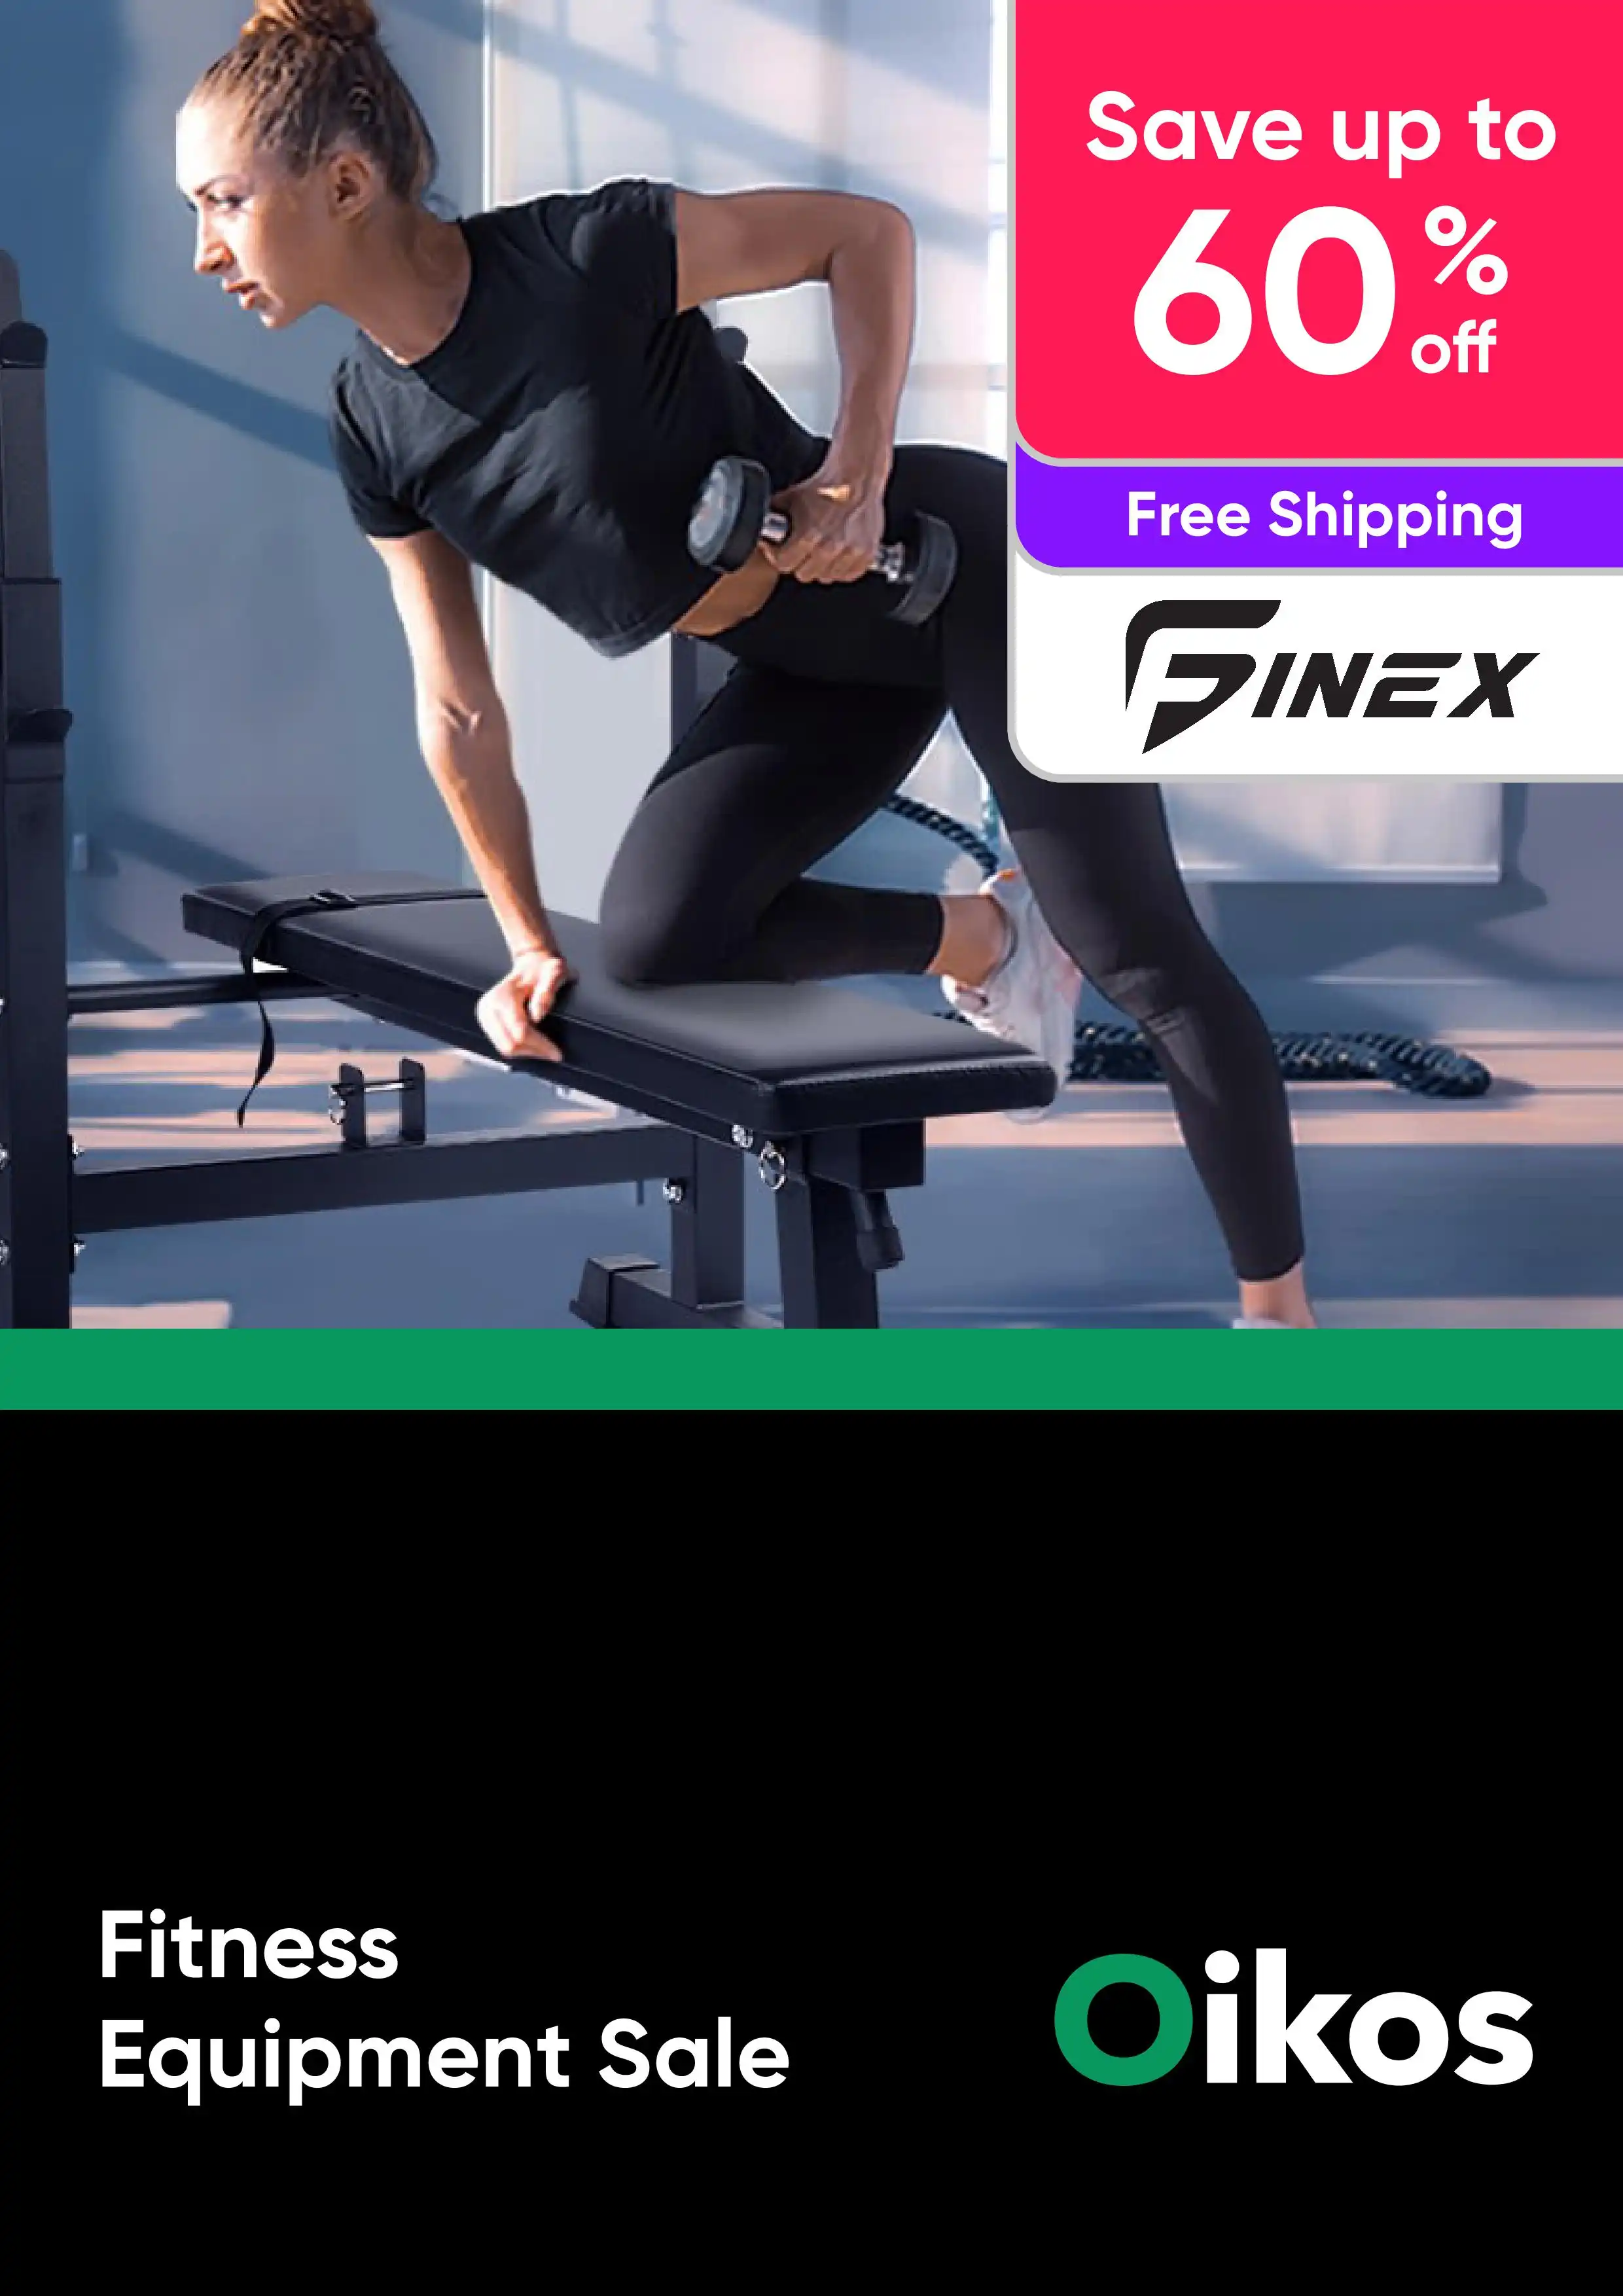 Fitness Equipment Sale - Treadmills, Rowing Machines, Weight Benches and More - Finex